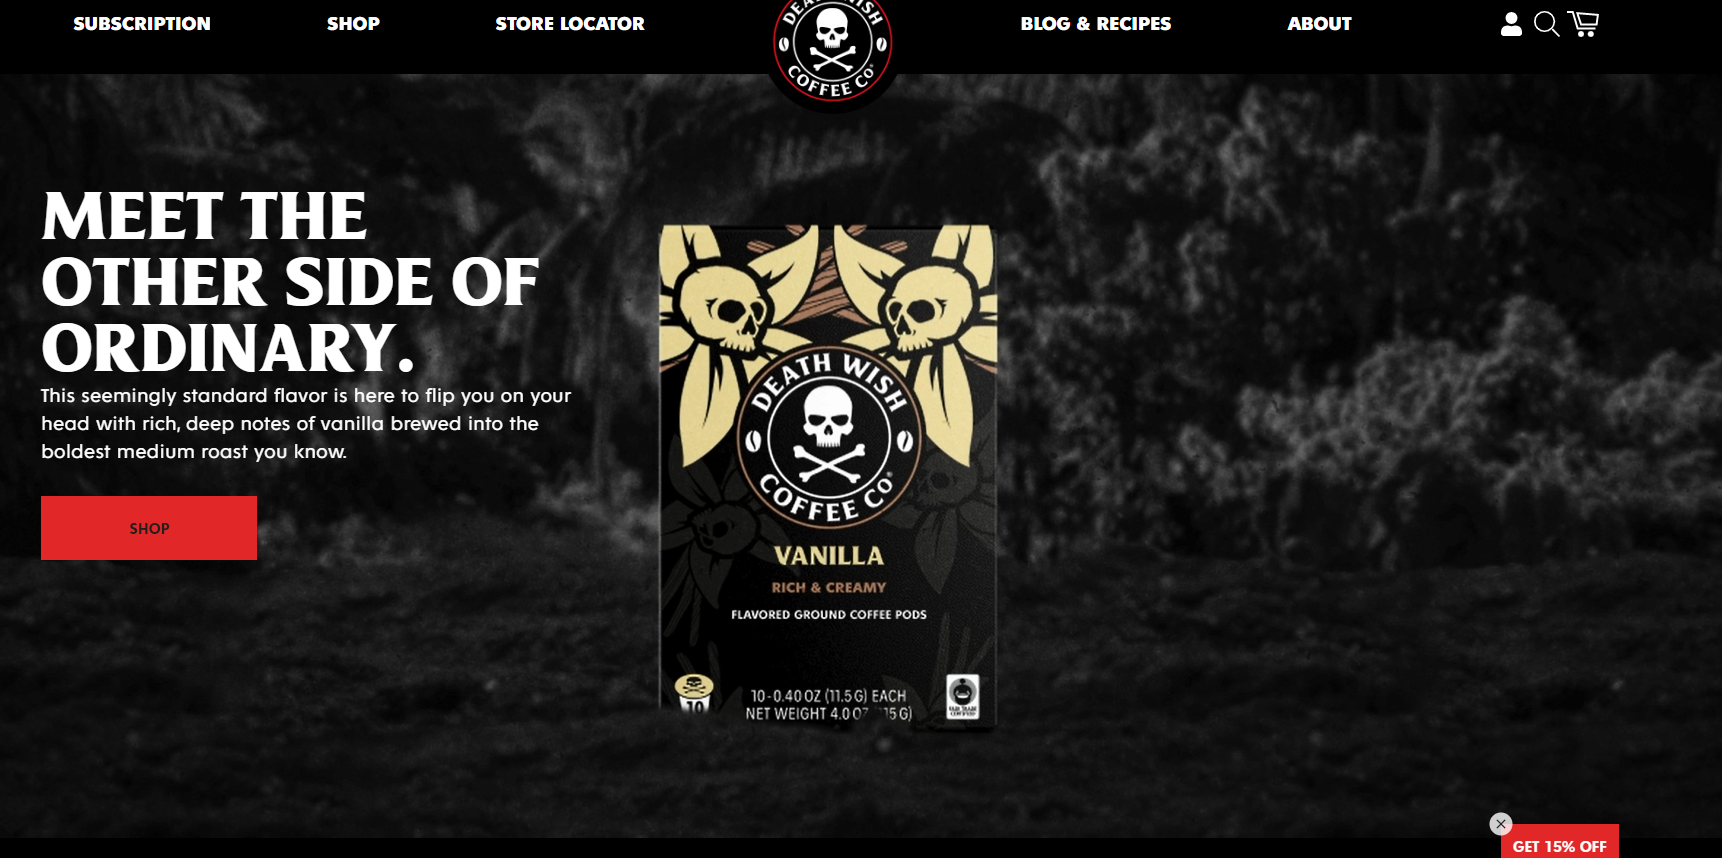 death wish coffee using storytelling to convert leads to sales